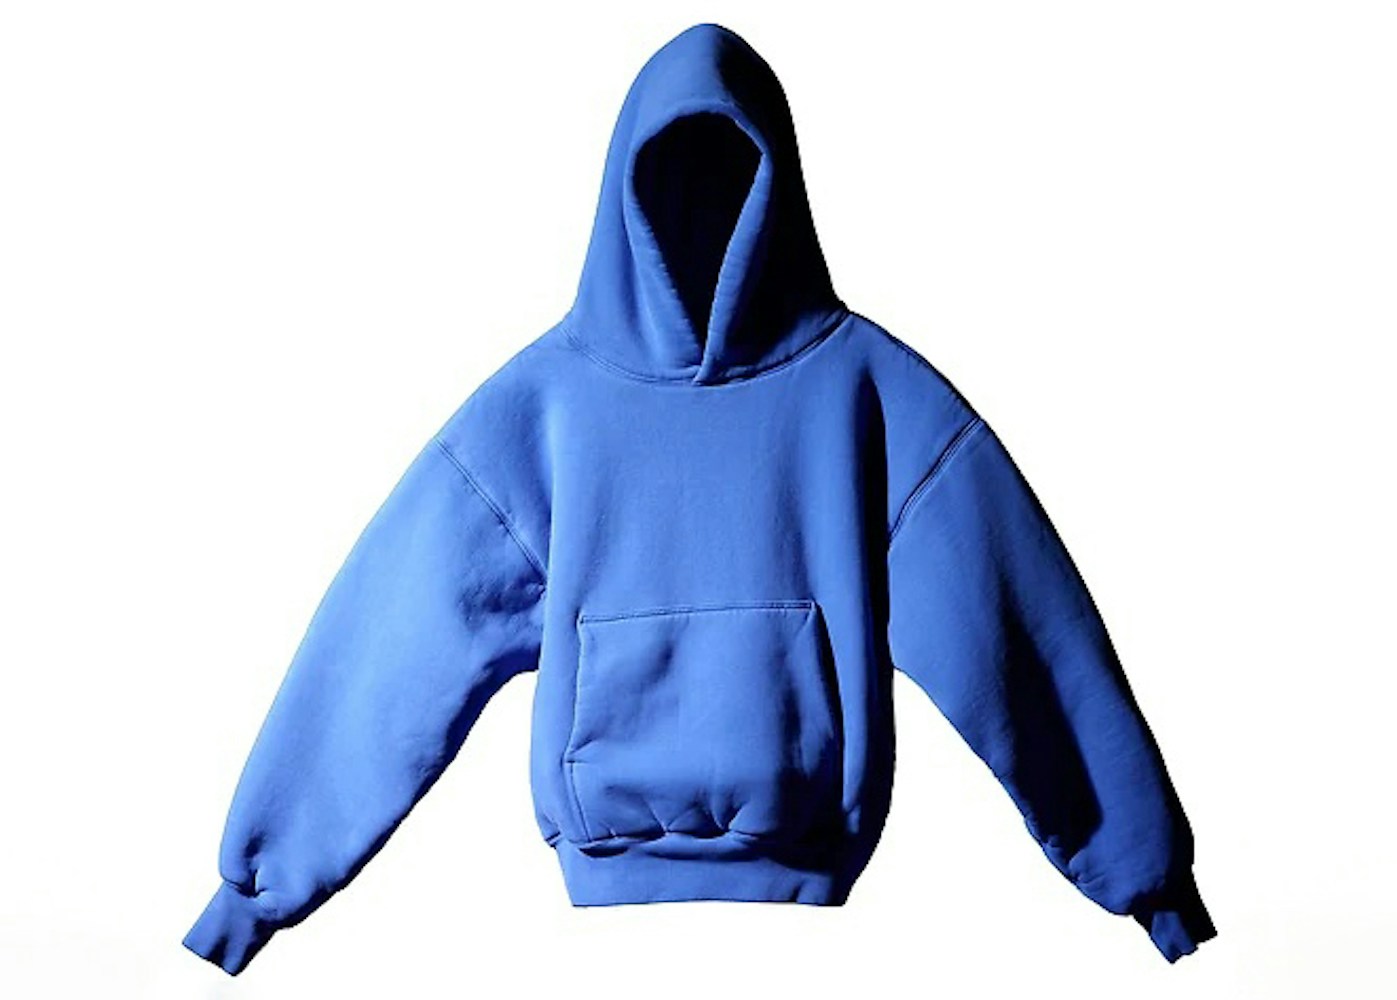 tempo barriere interview Yeezy x Gap Hoodie Blue - FW21